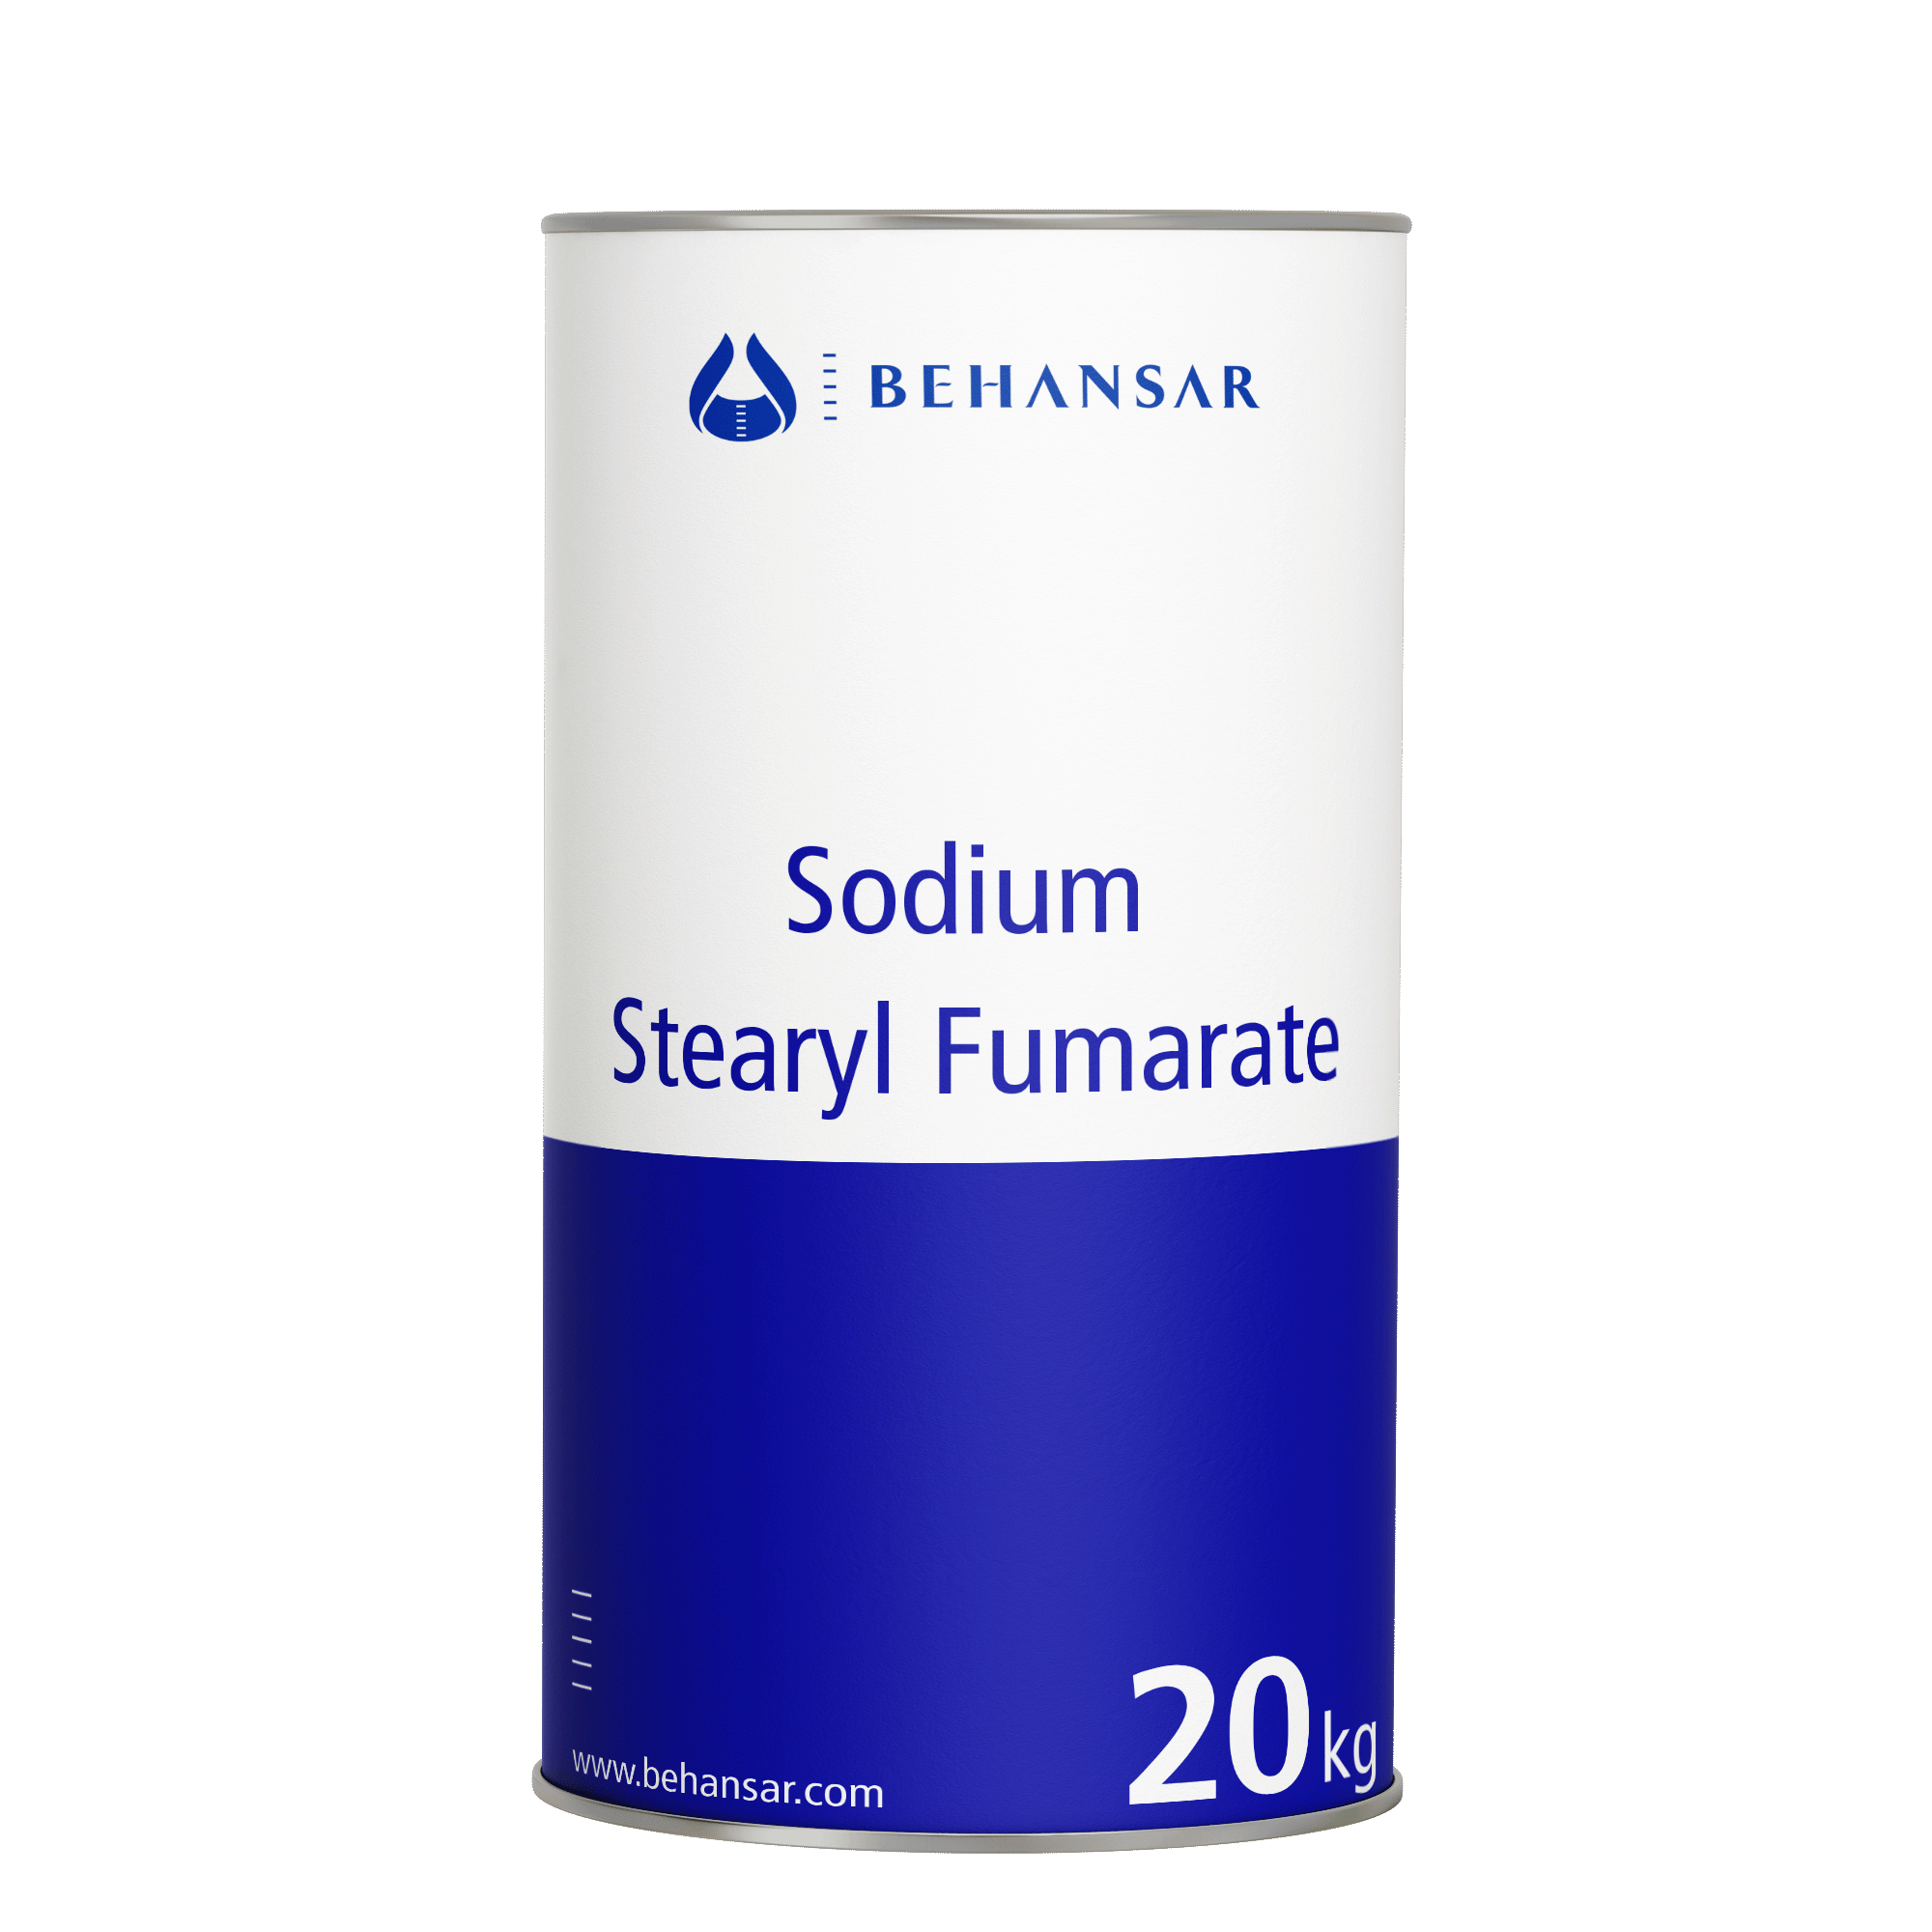 Sodium Stearyl Fumarate is one of the products of Behansar Co